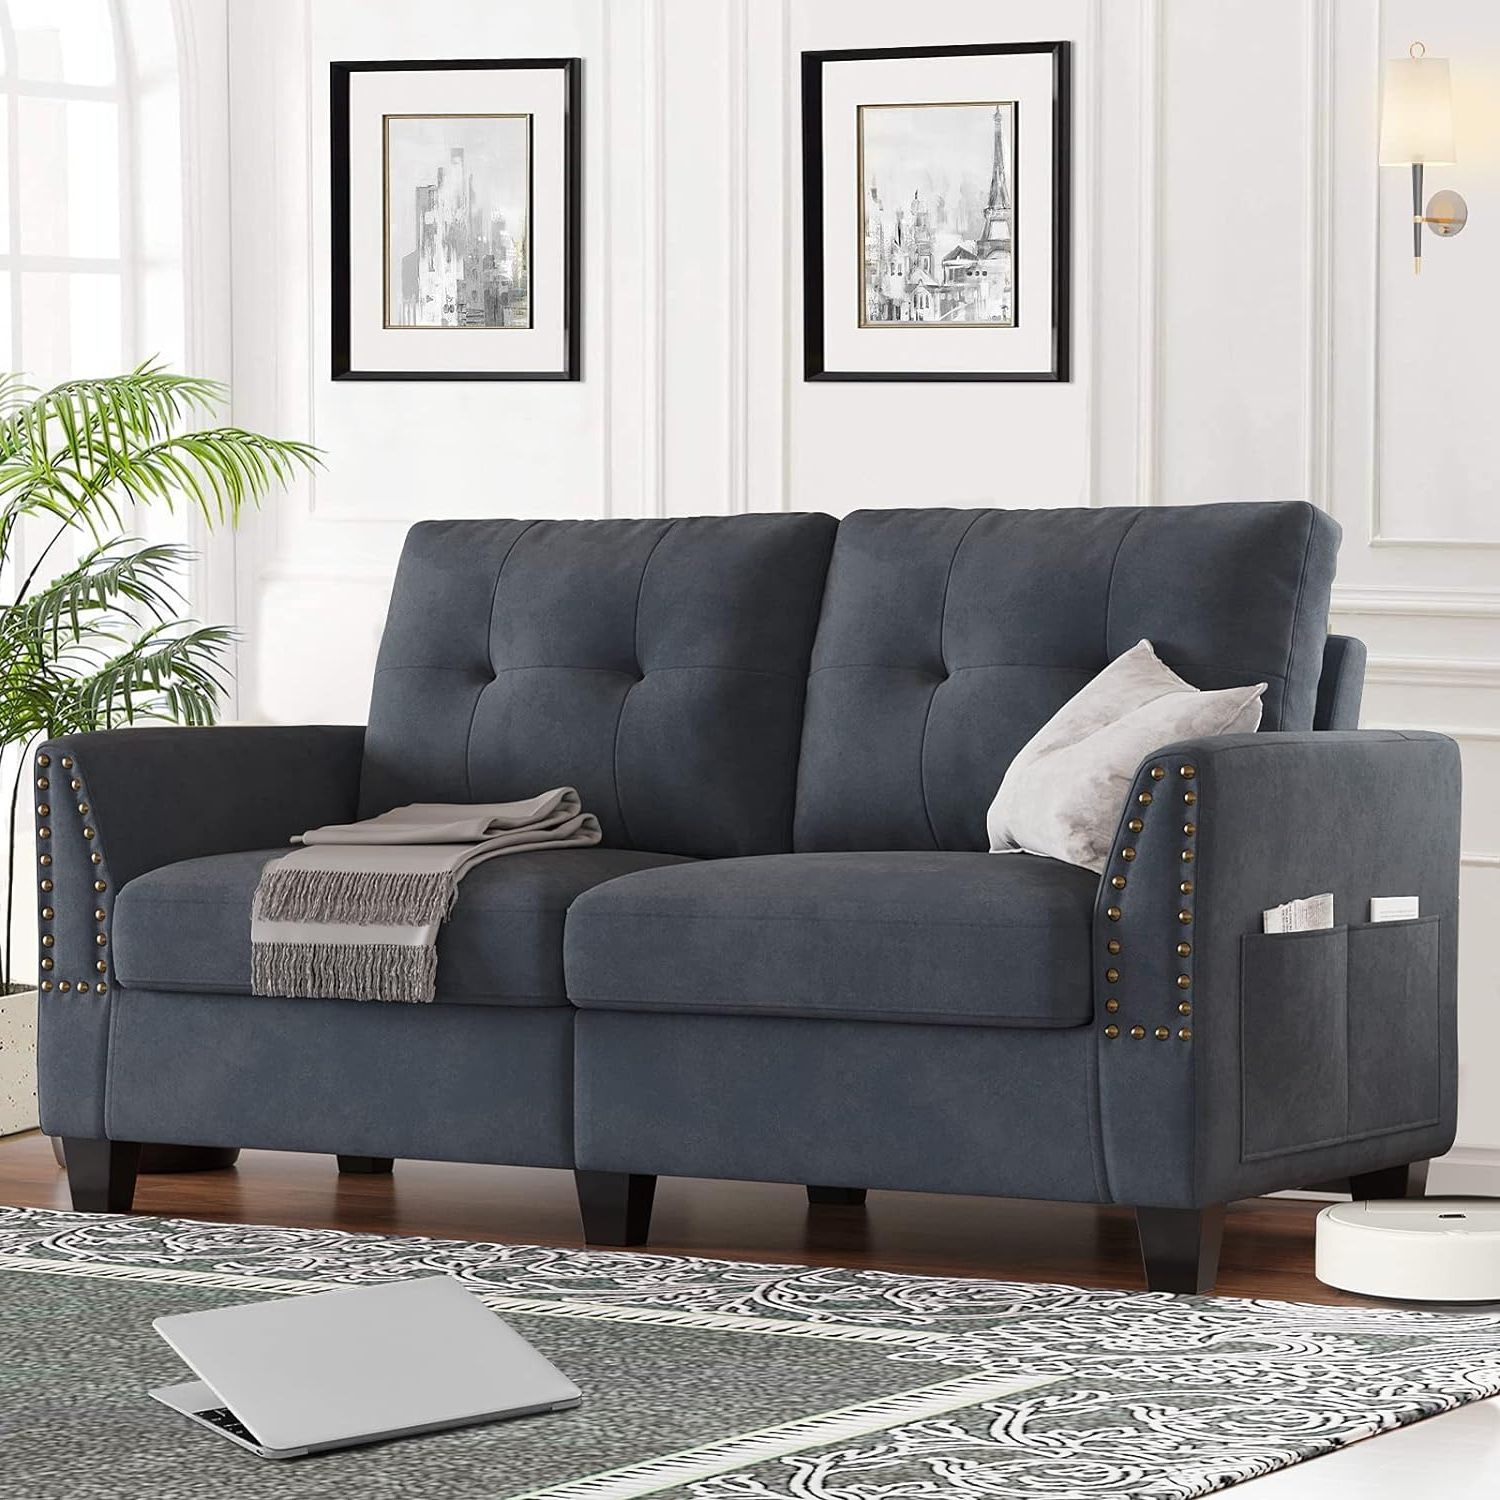 Buy Belffin Loveseat Sofa Couch Small Love Seats Furniture Bluish Grey For Current Sofas In Bluish Grey (View 6 of 15)